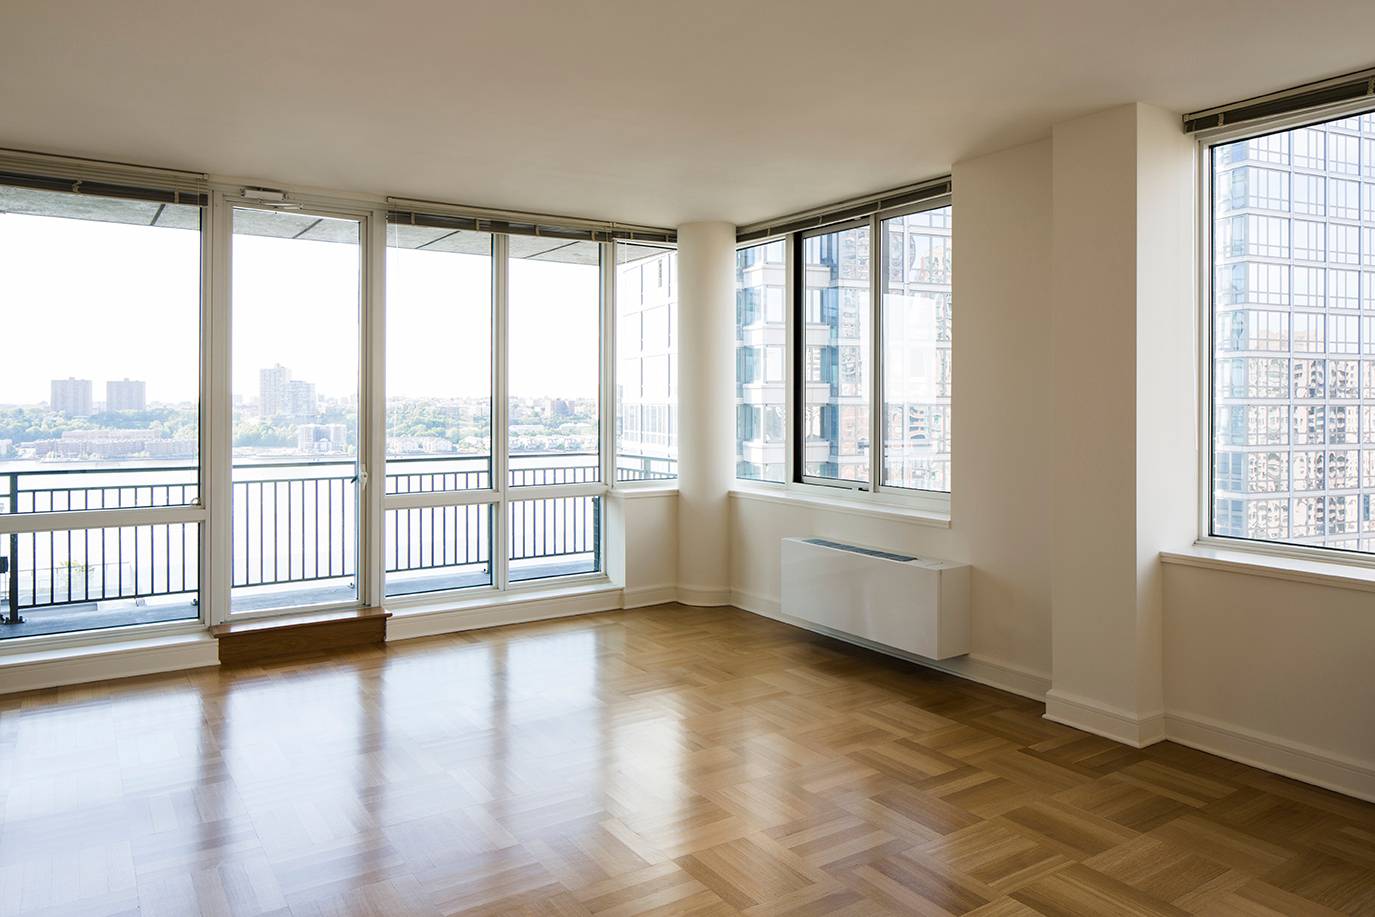 Find Your Paradise in this 1,772 SqFt 3 Bedroom / 3 Bath on the Upper West Side. 